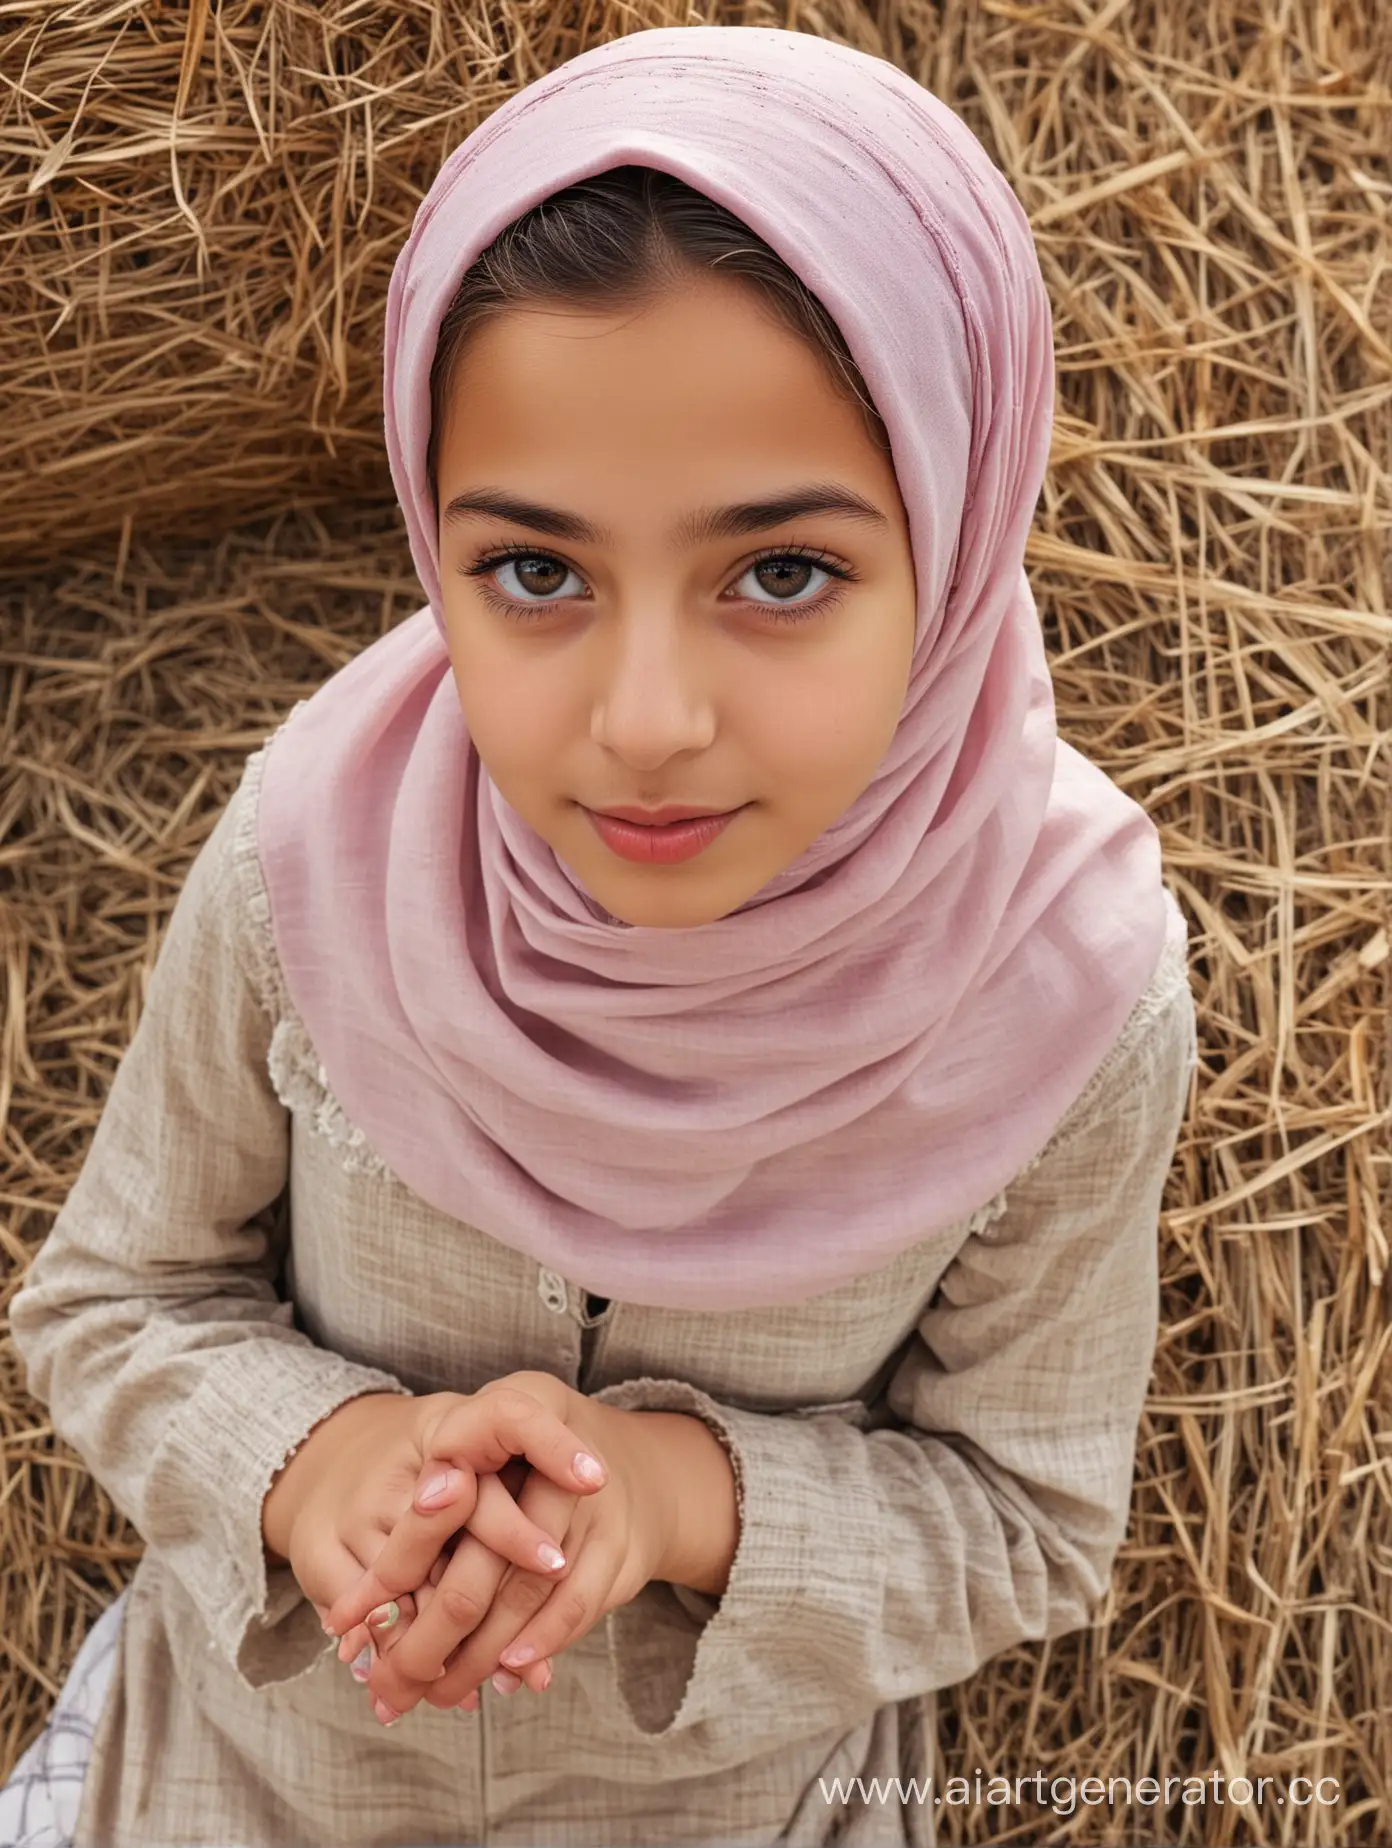 A little turkish girl. 12 years old. She wears a hijab, kids wear. Her height is 130cm. Close pov shot. Close up. From above. 8k sharp. Pretty face. Sits on the hay bales. The girl extends her hands to the viewer. Pursed lips. Different face. Plump lips.